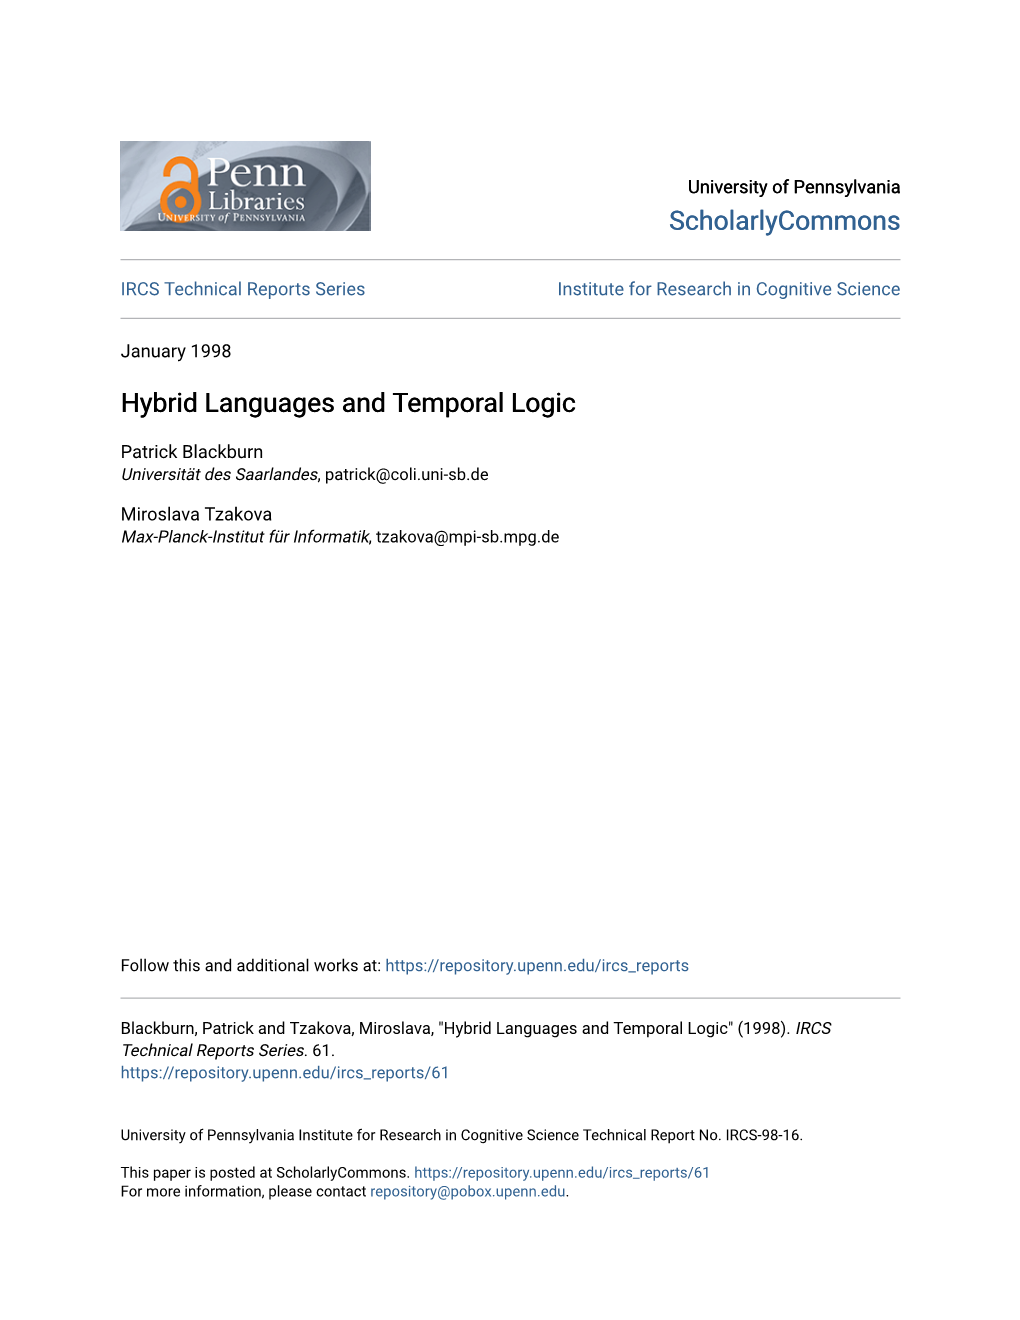 Hybrid Languages and Temporal Logic